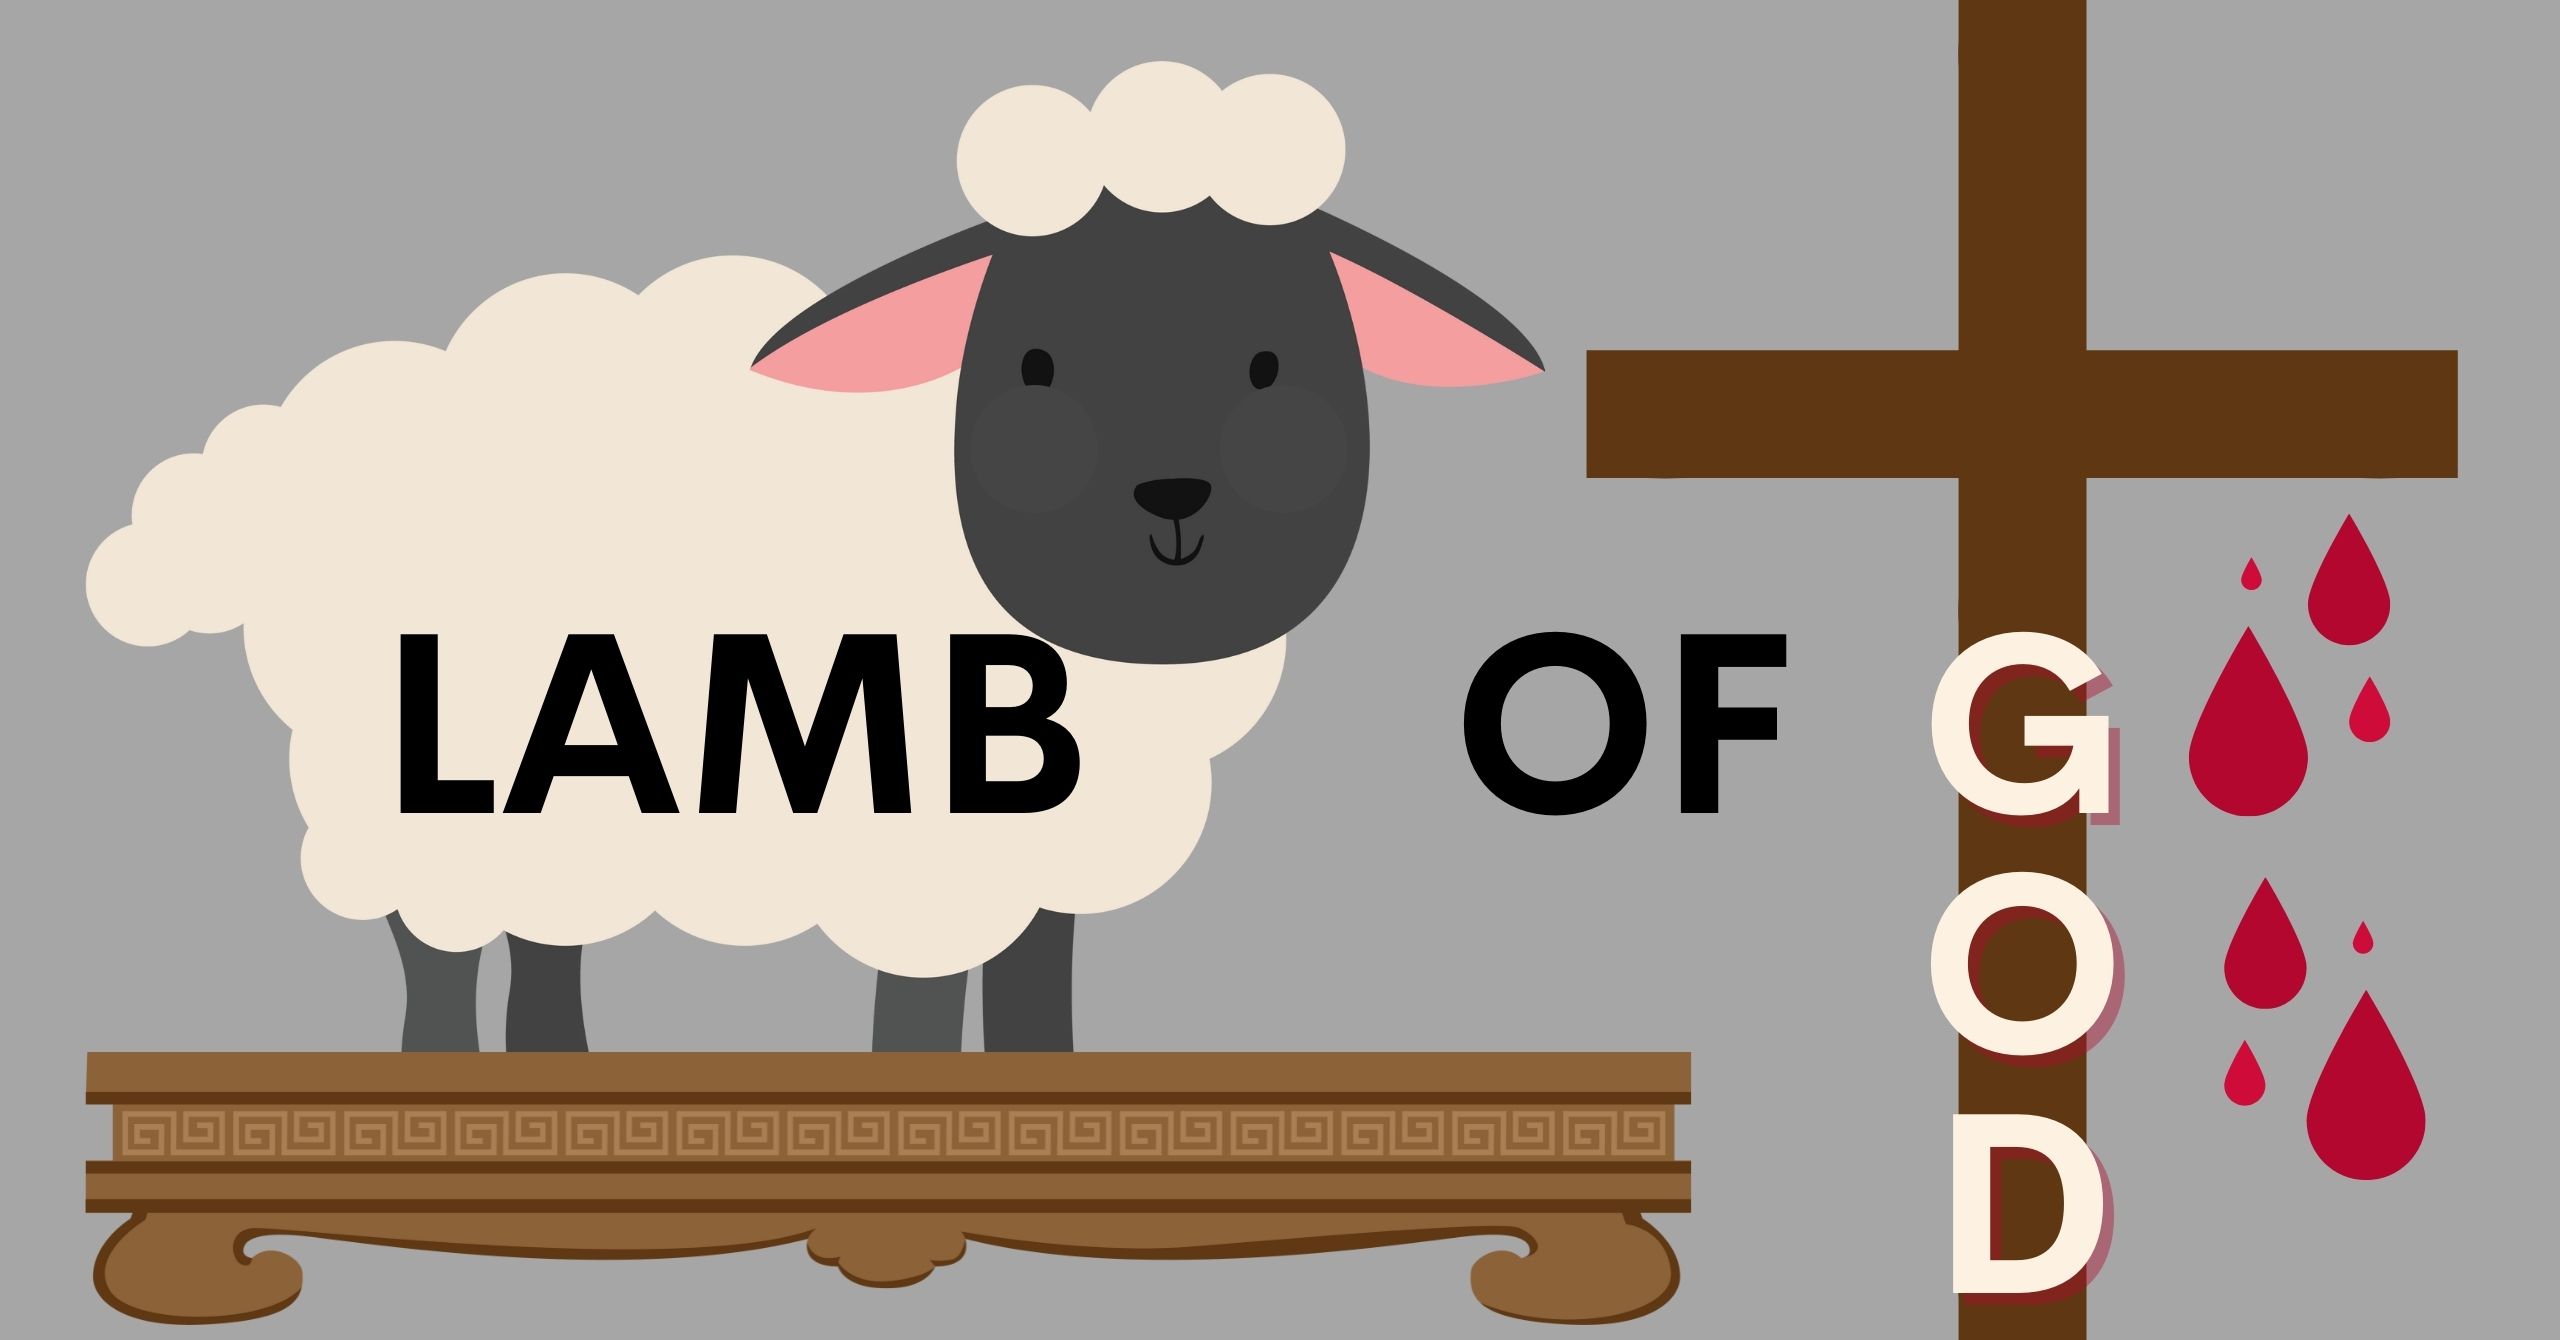 Featured image for “The Lamb of God”